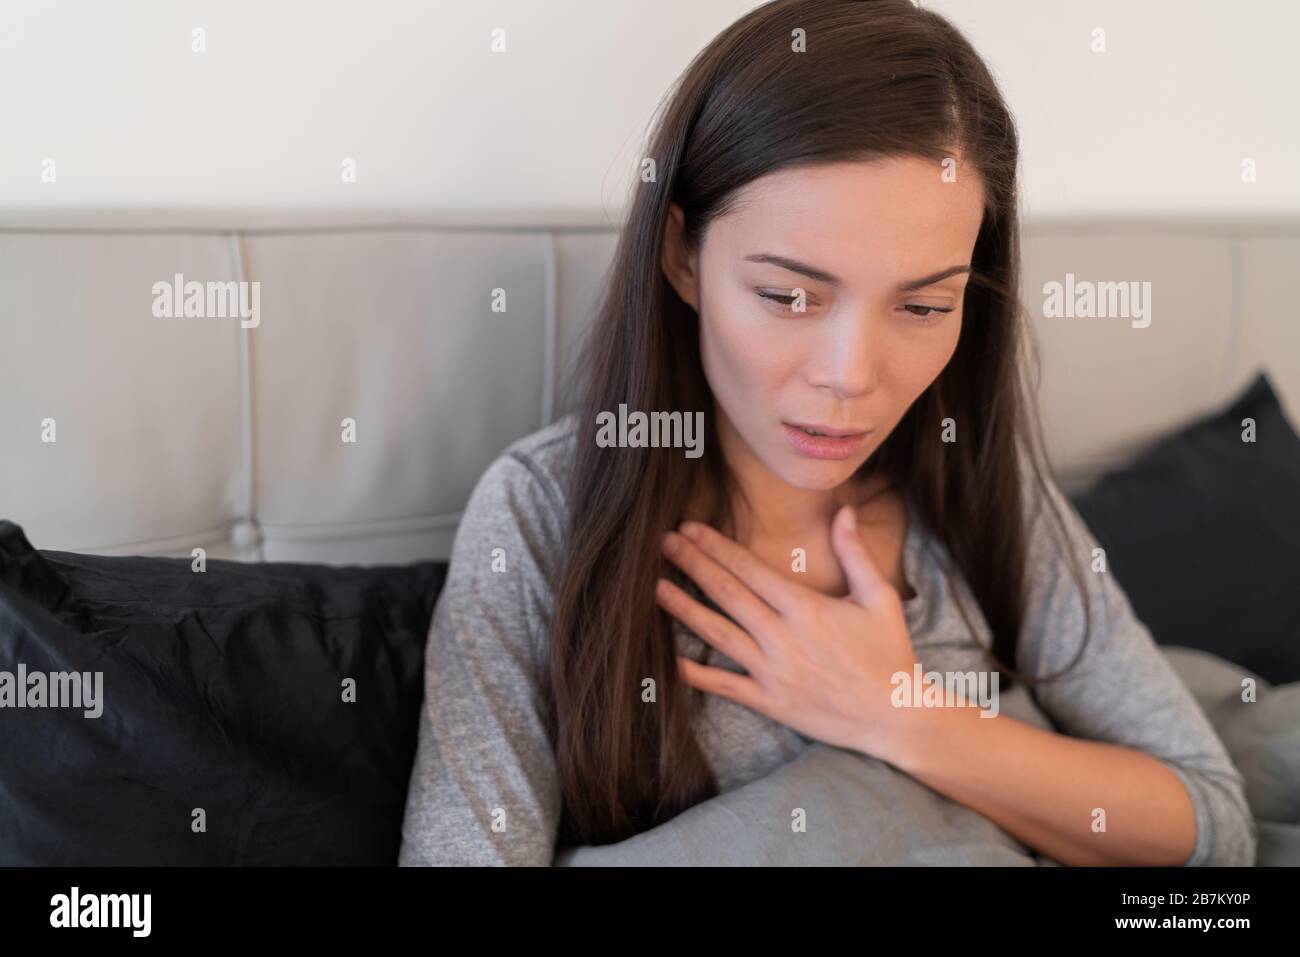 Coronavirus disease (COVID-19) Corona virus illness can be more severe for some people and can lead to pneumonia or breathing difficulties. Asian woman with shortness of breath sick at home. Stock Photo